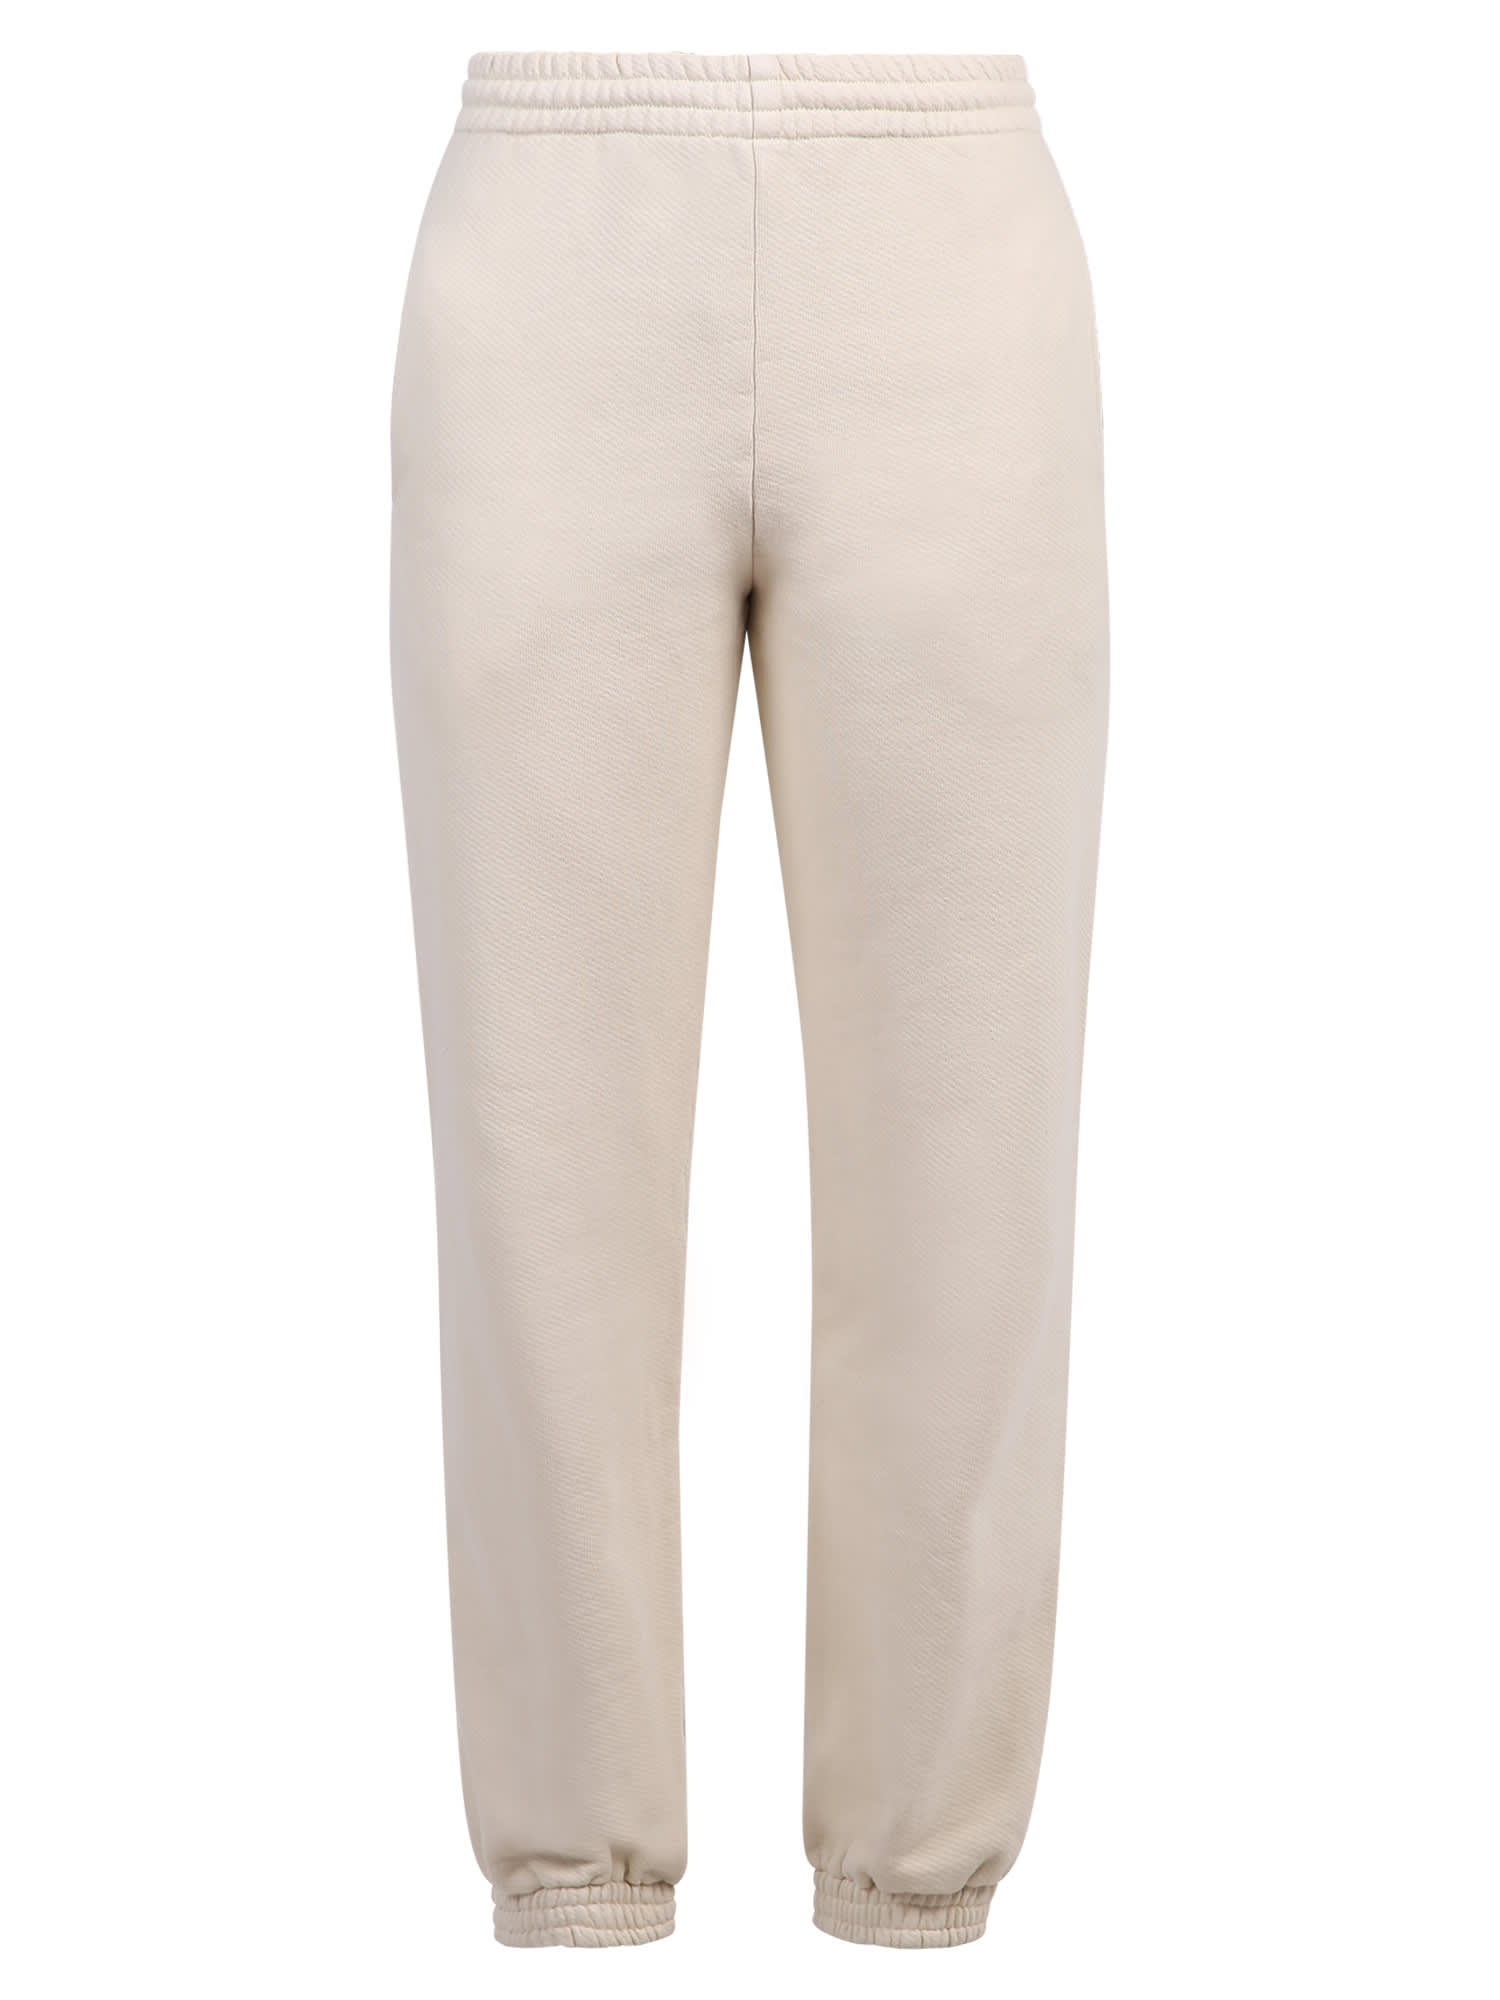 OFF-WHITE OFF-WHITE JOGGING TROUSERS,OWCH006R21JER0036161 6161 BEIGE BEIGE